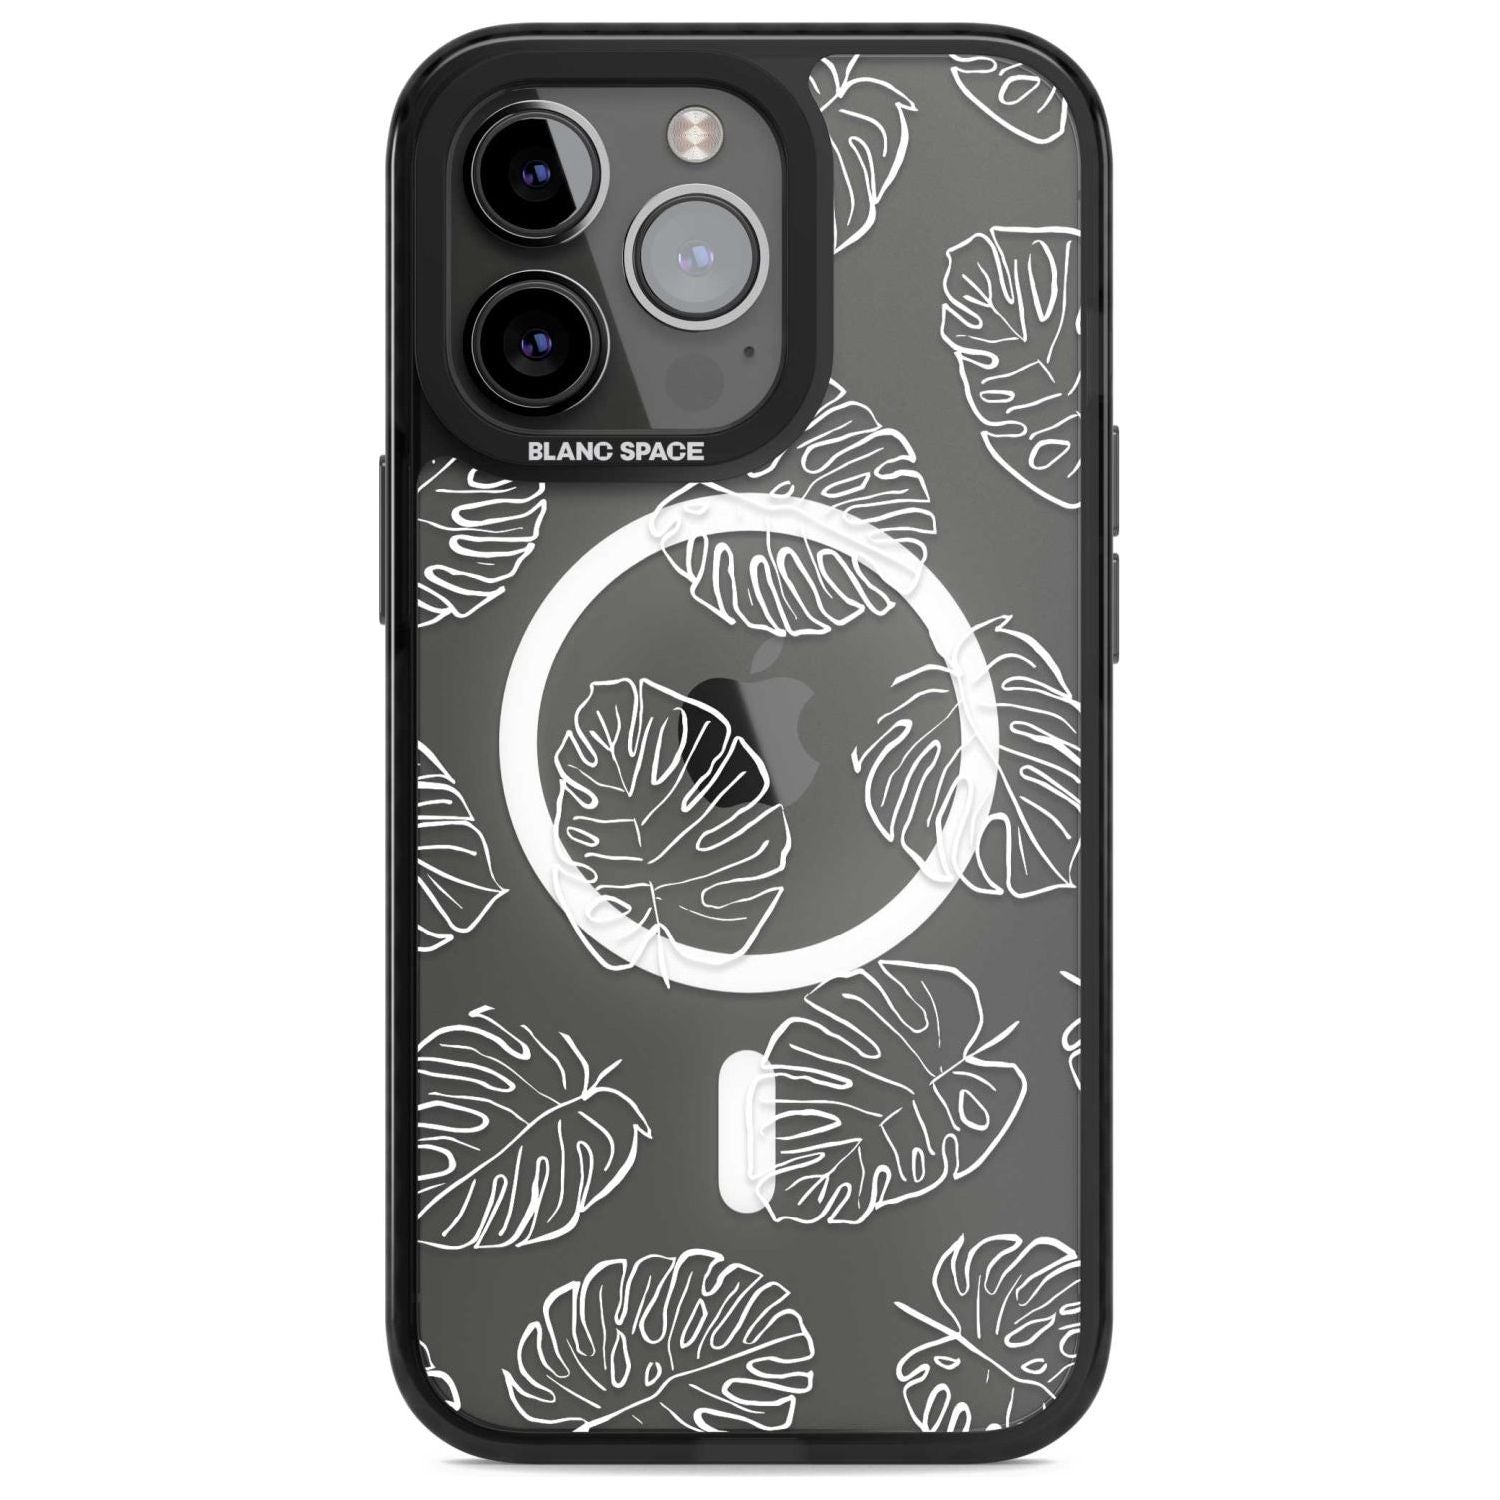 Monstera Leaves Phone Case iPhone 15 Pro Max / Magsafe Black Impact Case,iPhone 15 Pro / Magsafe Black Impact Case,iPhone 14 Pro Max / Magsafe Black Impact Case,iPhone 14 Pro / Magsafe Black Impact Case,iPhone 13 Pro / Magsafe Black Impact Case Blanc Space